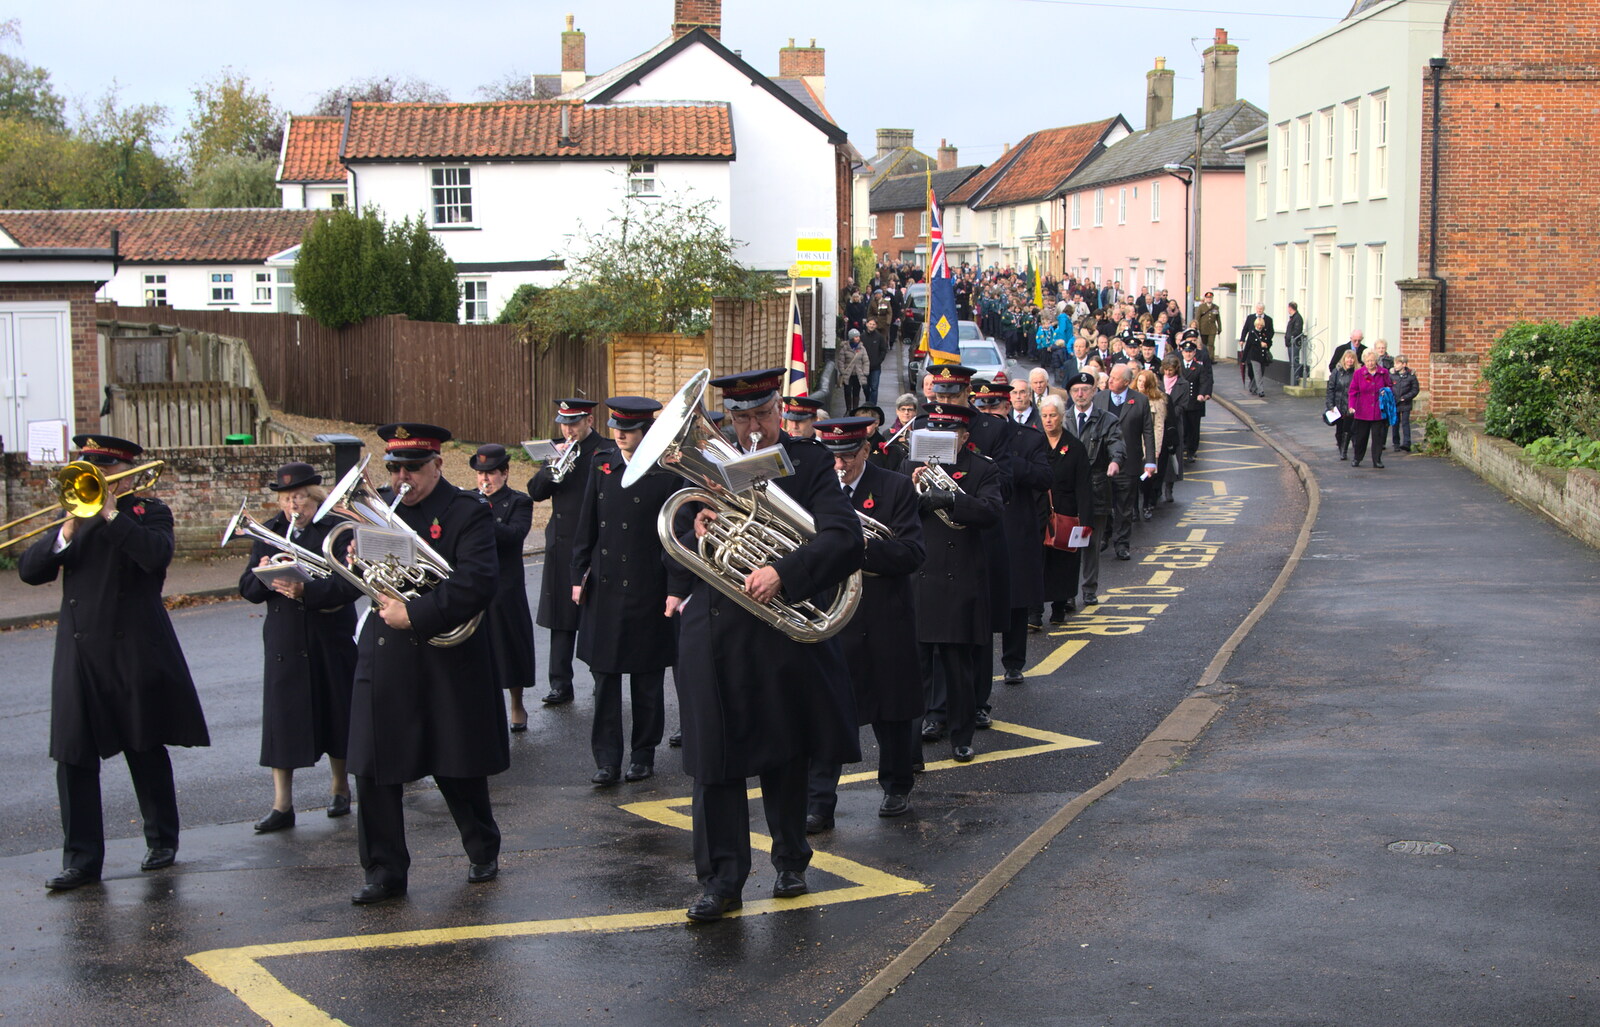 The parade on Church Street from A Remembrance Sunday Parade, Eye, Suffolk - 9th November 2014